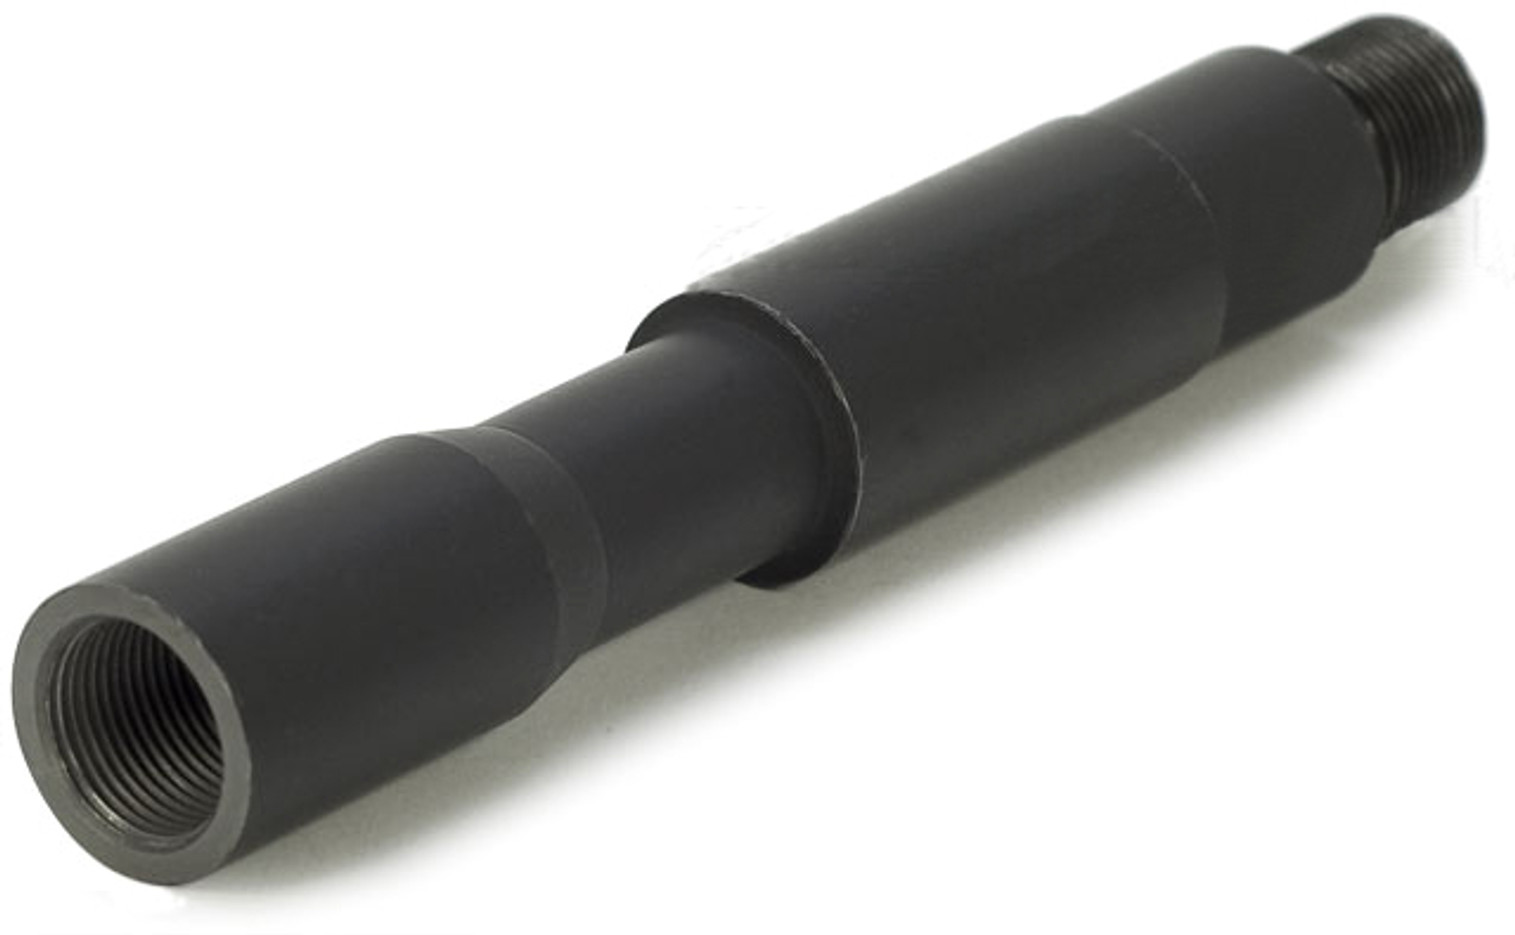 Matrix Steel 4.5" Outer Barrel Extension for Airsoft AEG (14mm Negative / Counter-Clockwise)